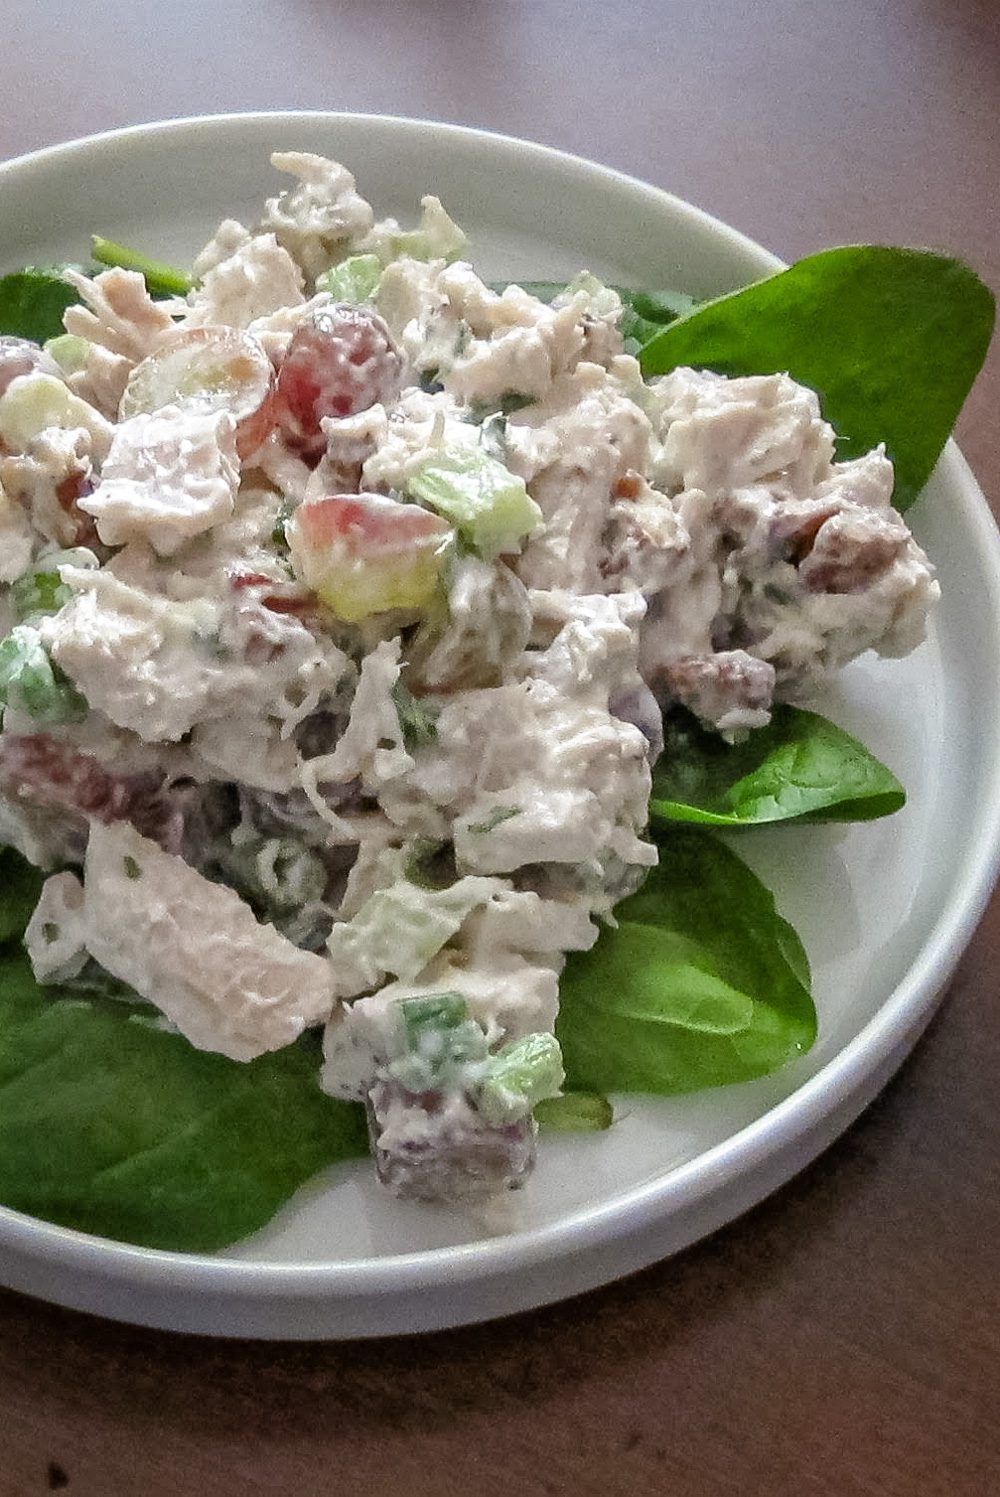 curry turkey salad with grapes on lettuce leaves